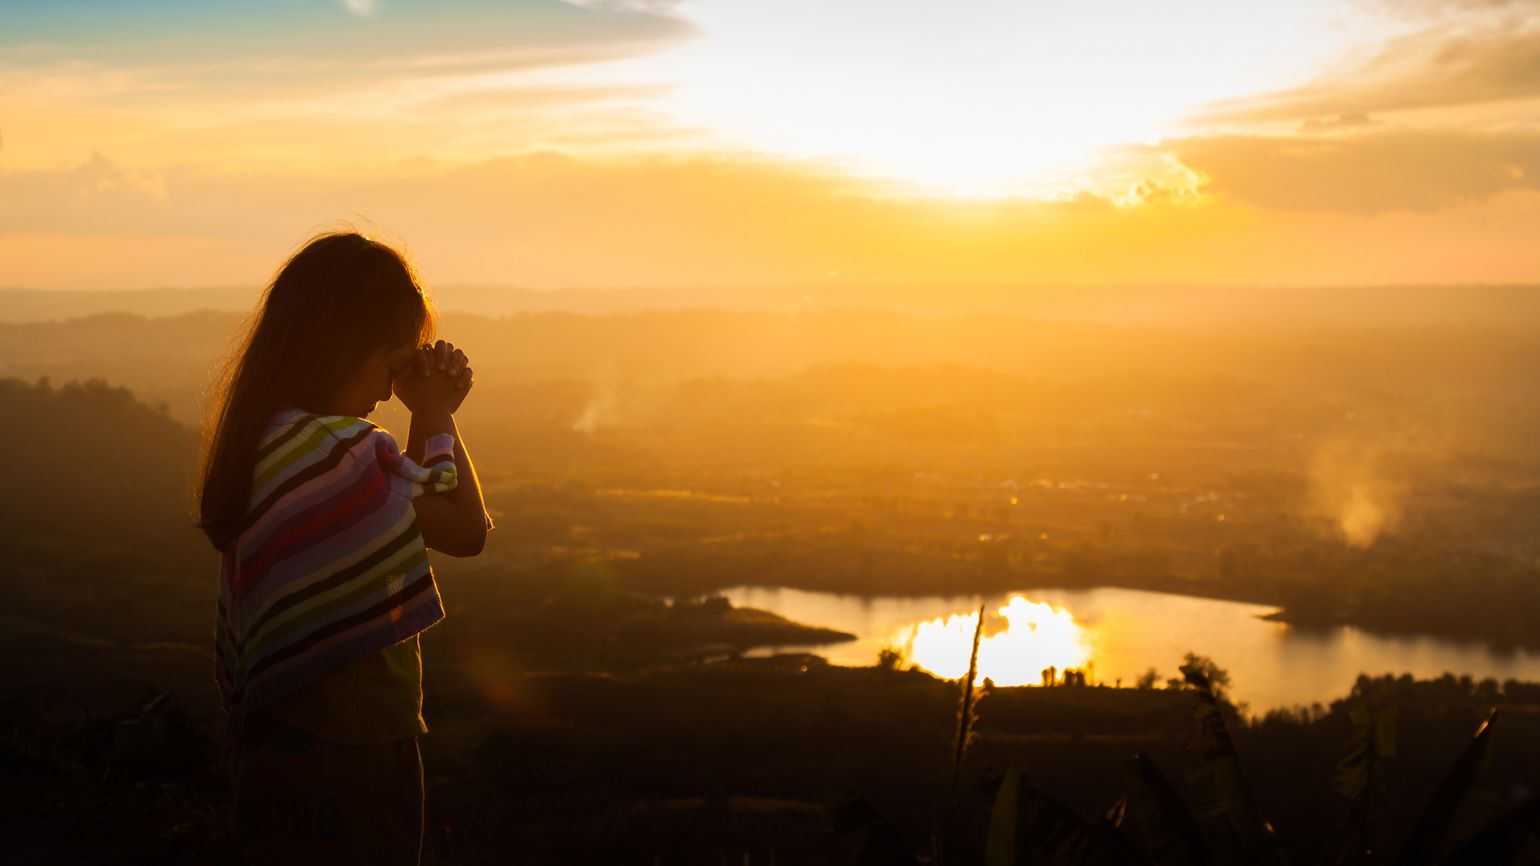 A young girl praying outdoors during a brilliant sunset.